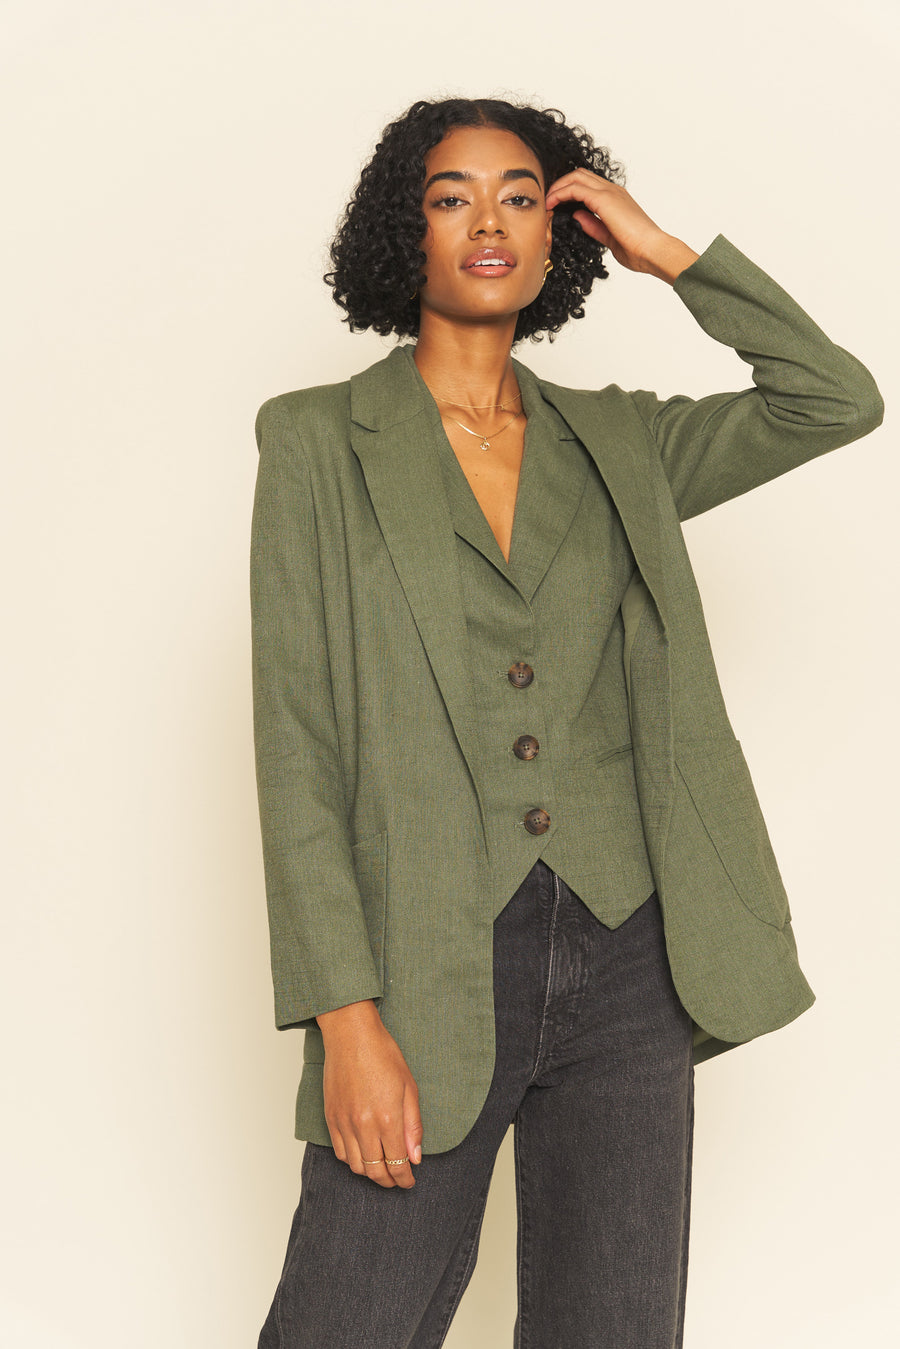 No Srcipt image - Images of 6 of 7 Vincent Linen Boyfriend Jacket Light Weight Spring Summer Blazer Neutral Deep Dark Green Color Classic Workwear Office Wear Womens Fashion Professional Chic Polished Fashion 